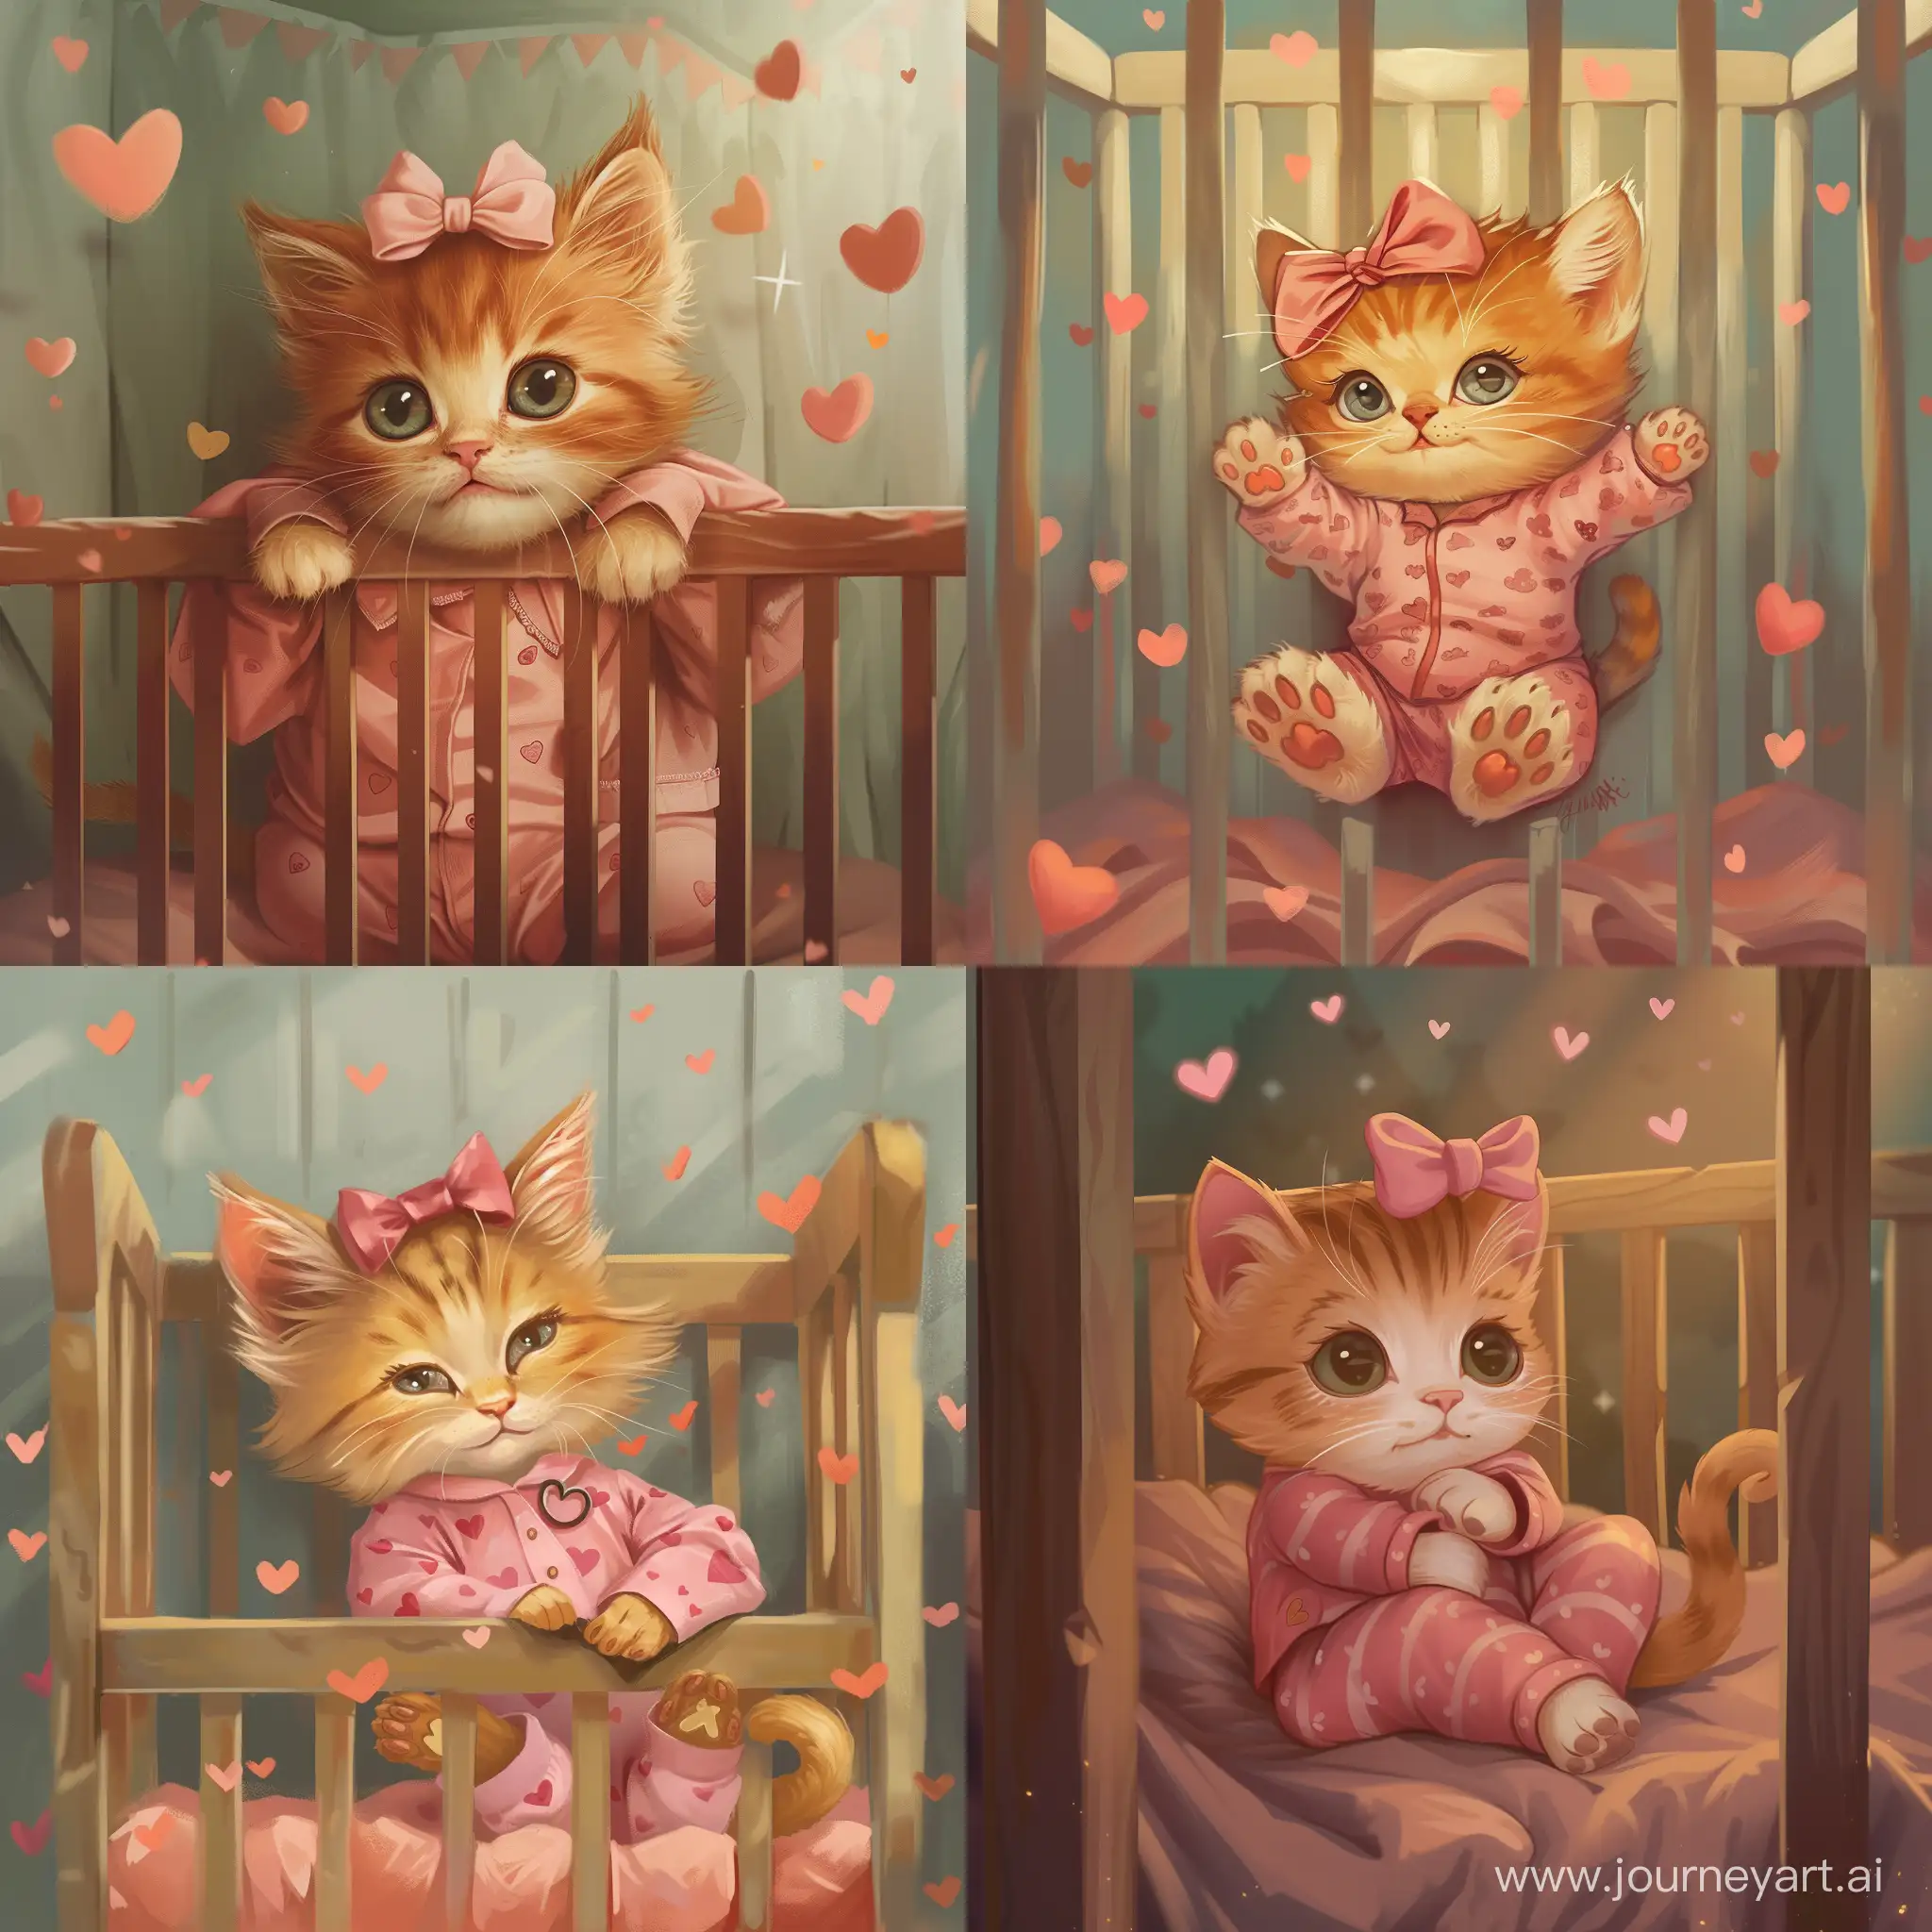 Adorable-PinkPajama-Ginger-Kitten-in-Crib-with-Hearts